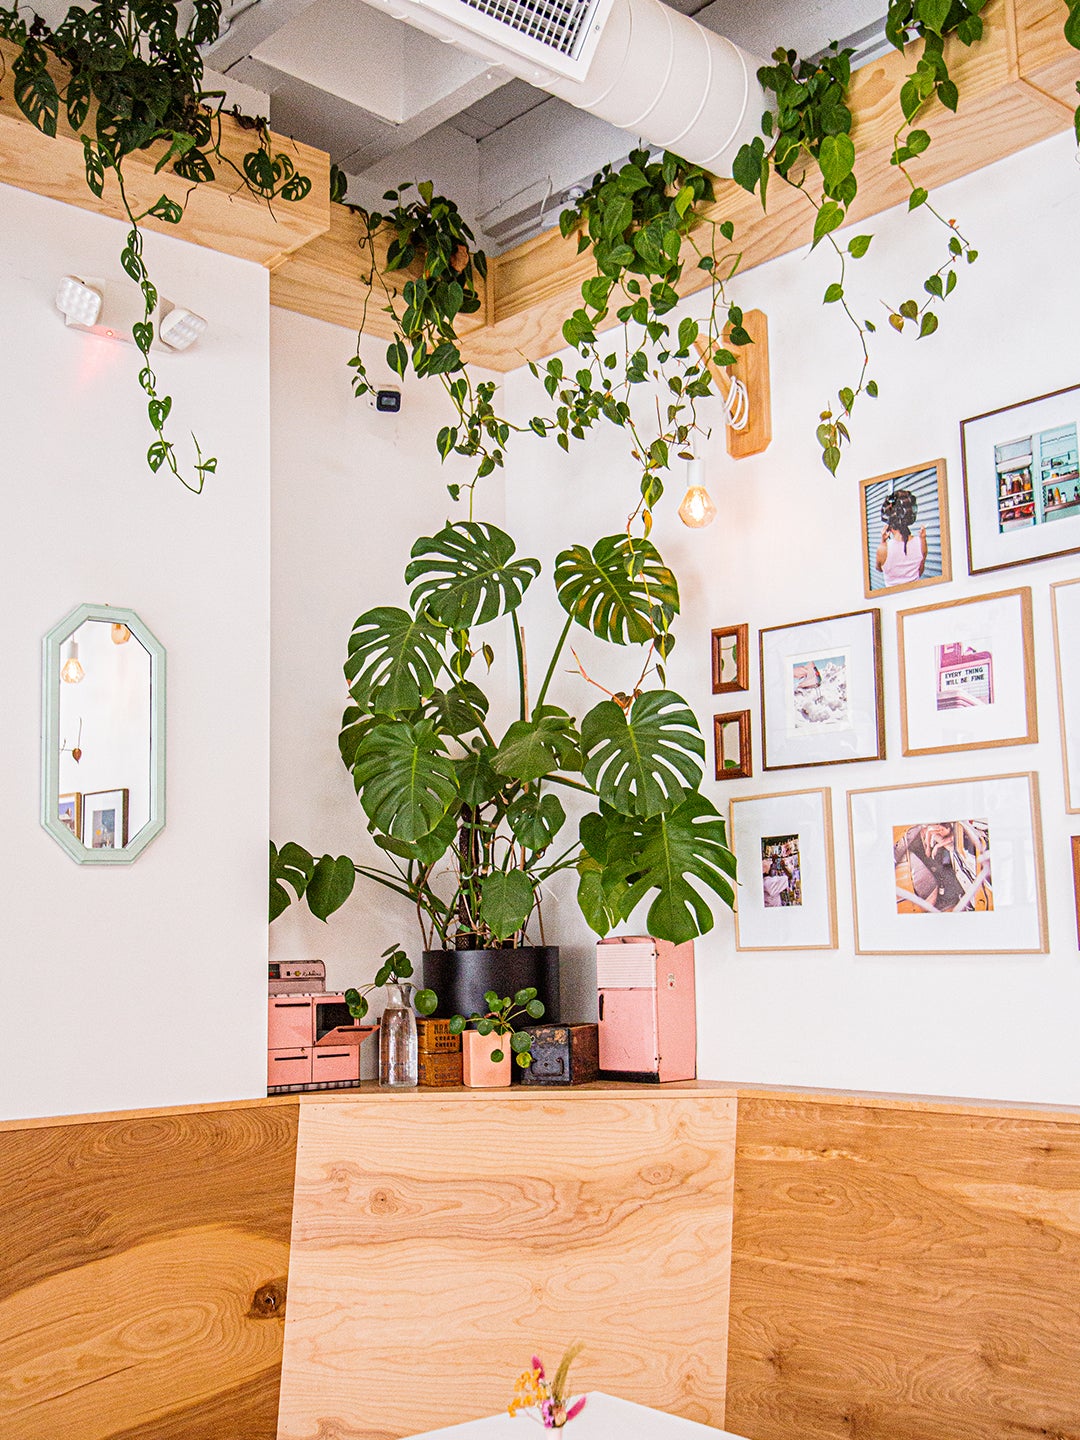 Ceiling Planter Boxes Give This Space All the Drama With Little Greenery Upkeep